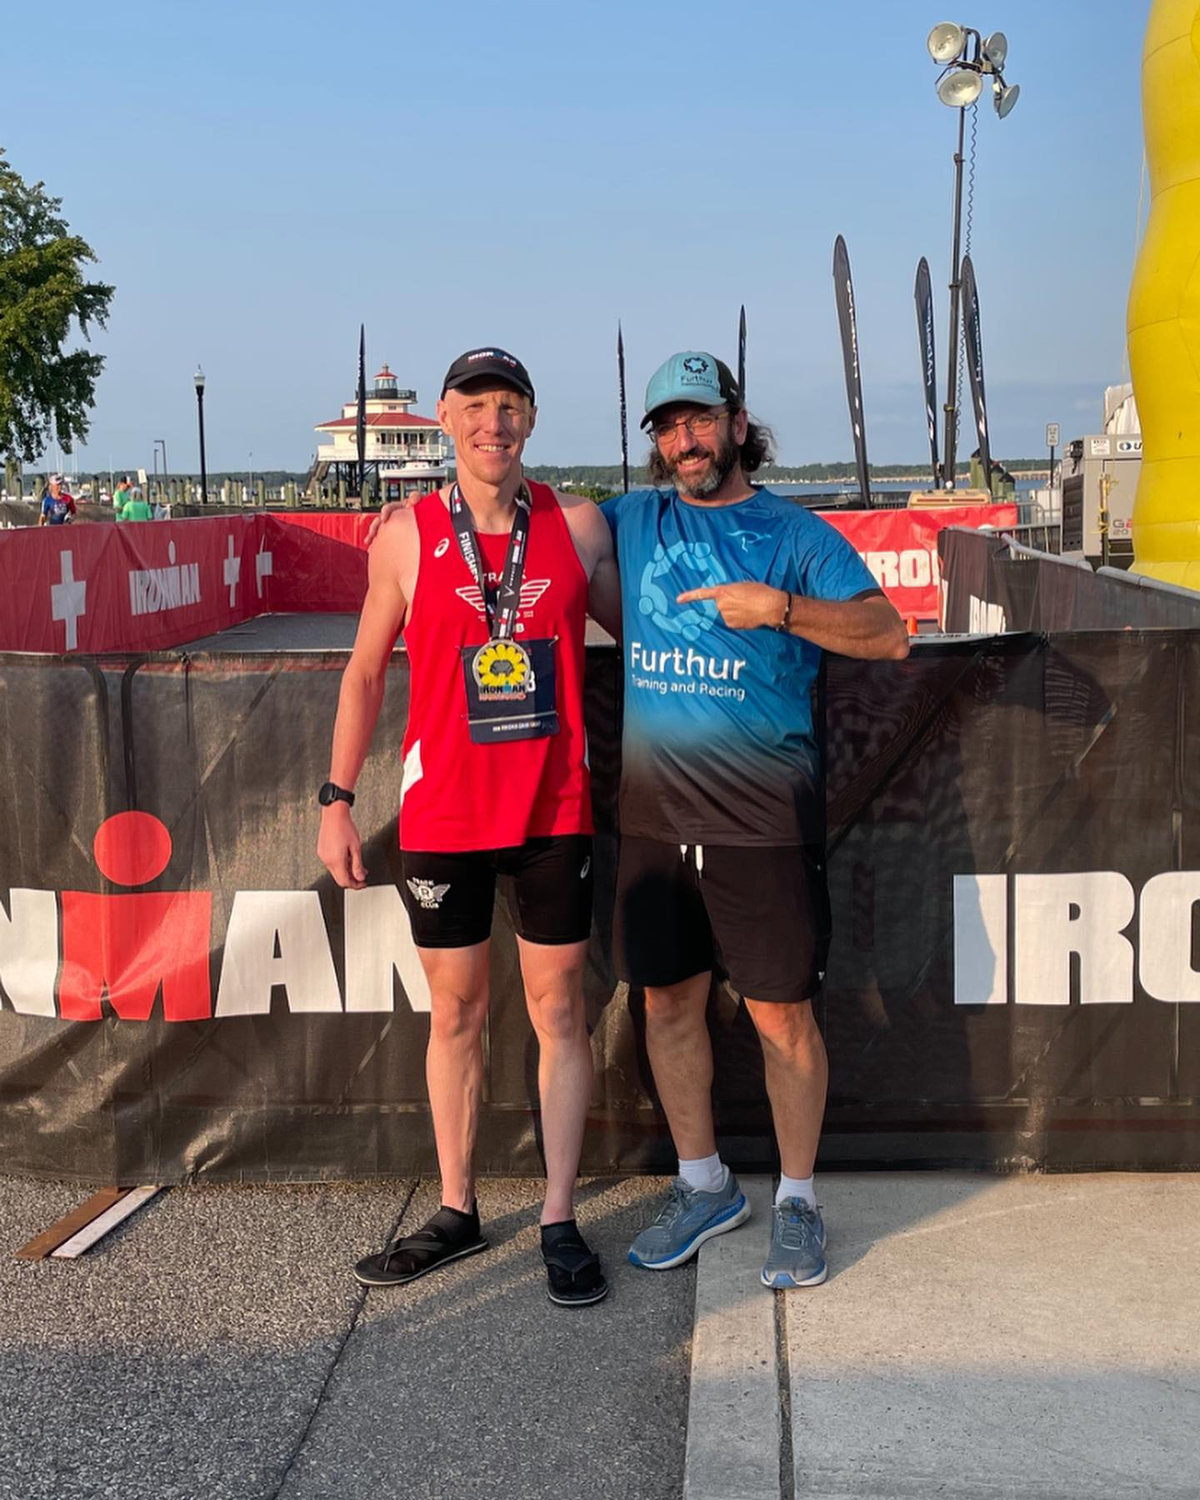 Steve Hallman, left, completed Ironman Maryland in the top 10% of the field.